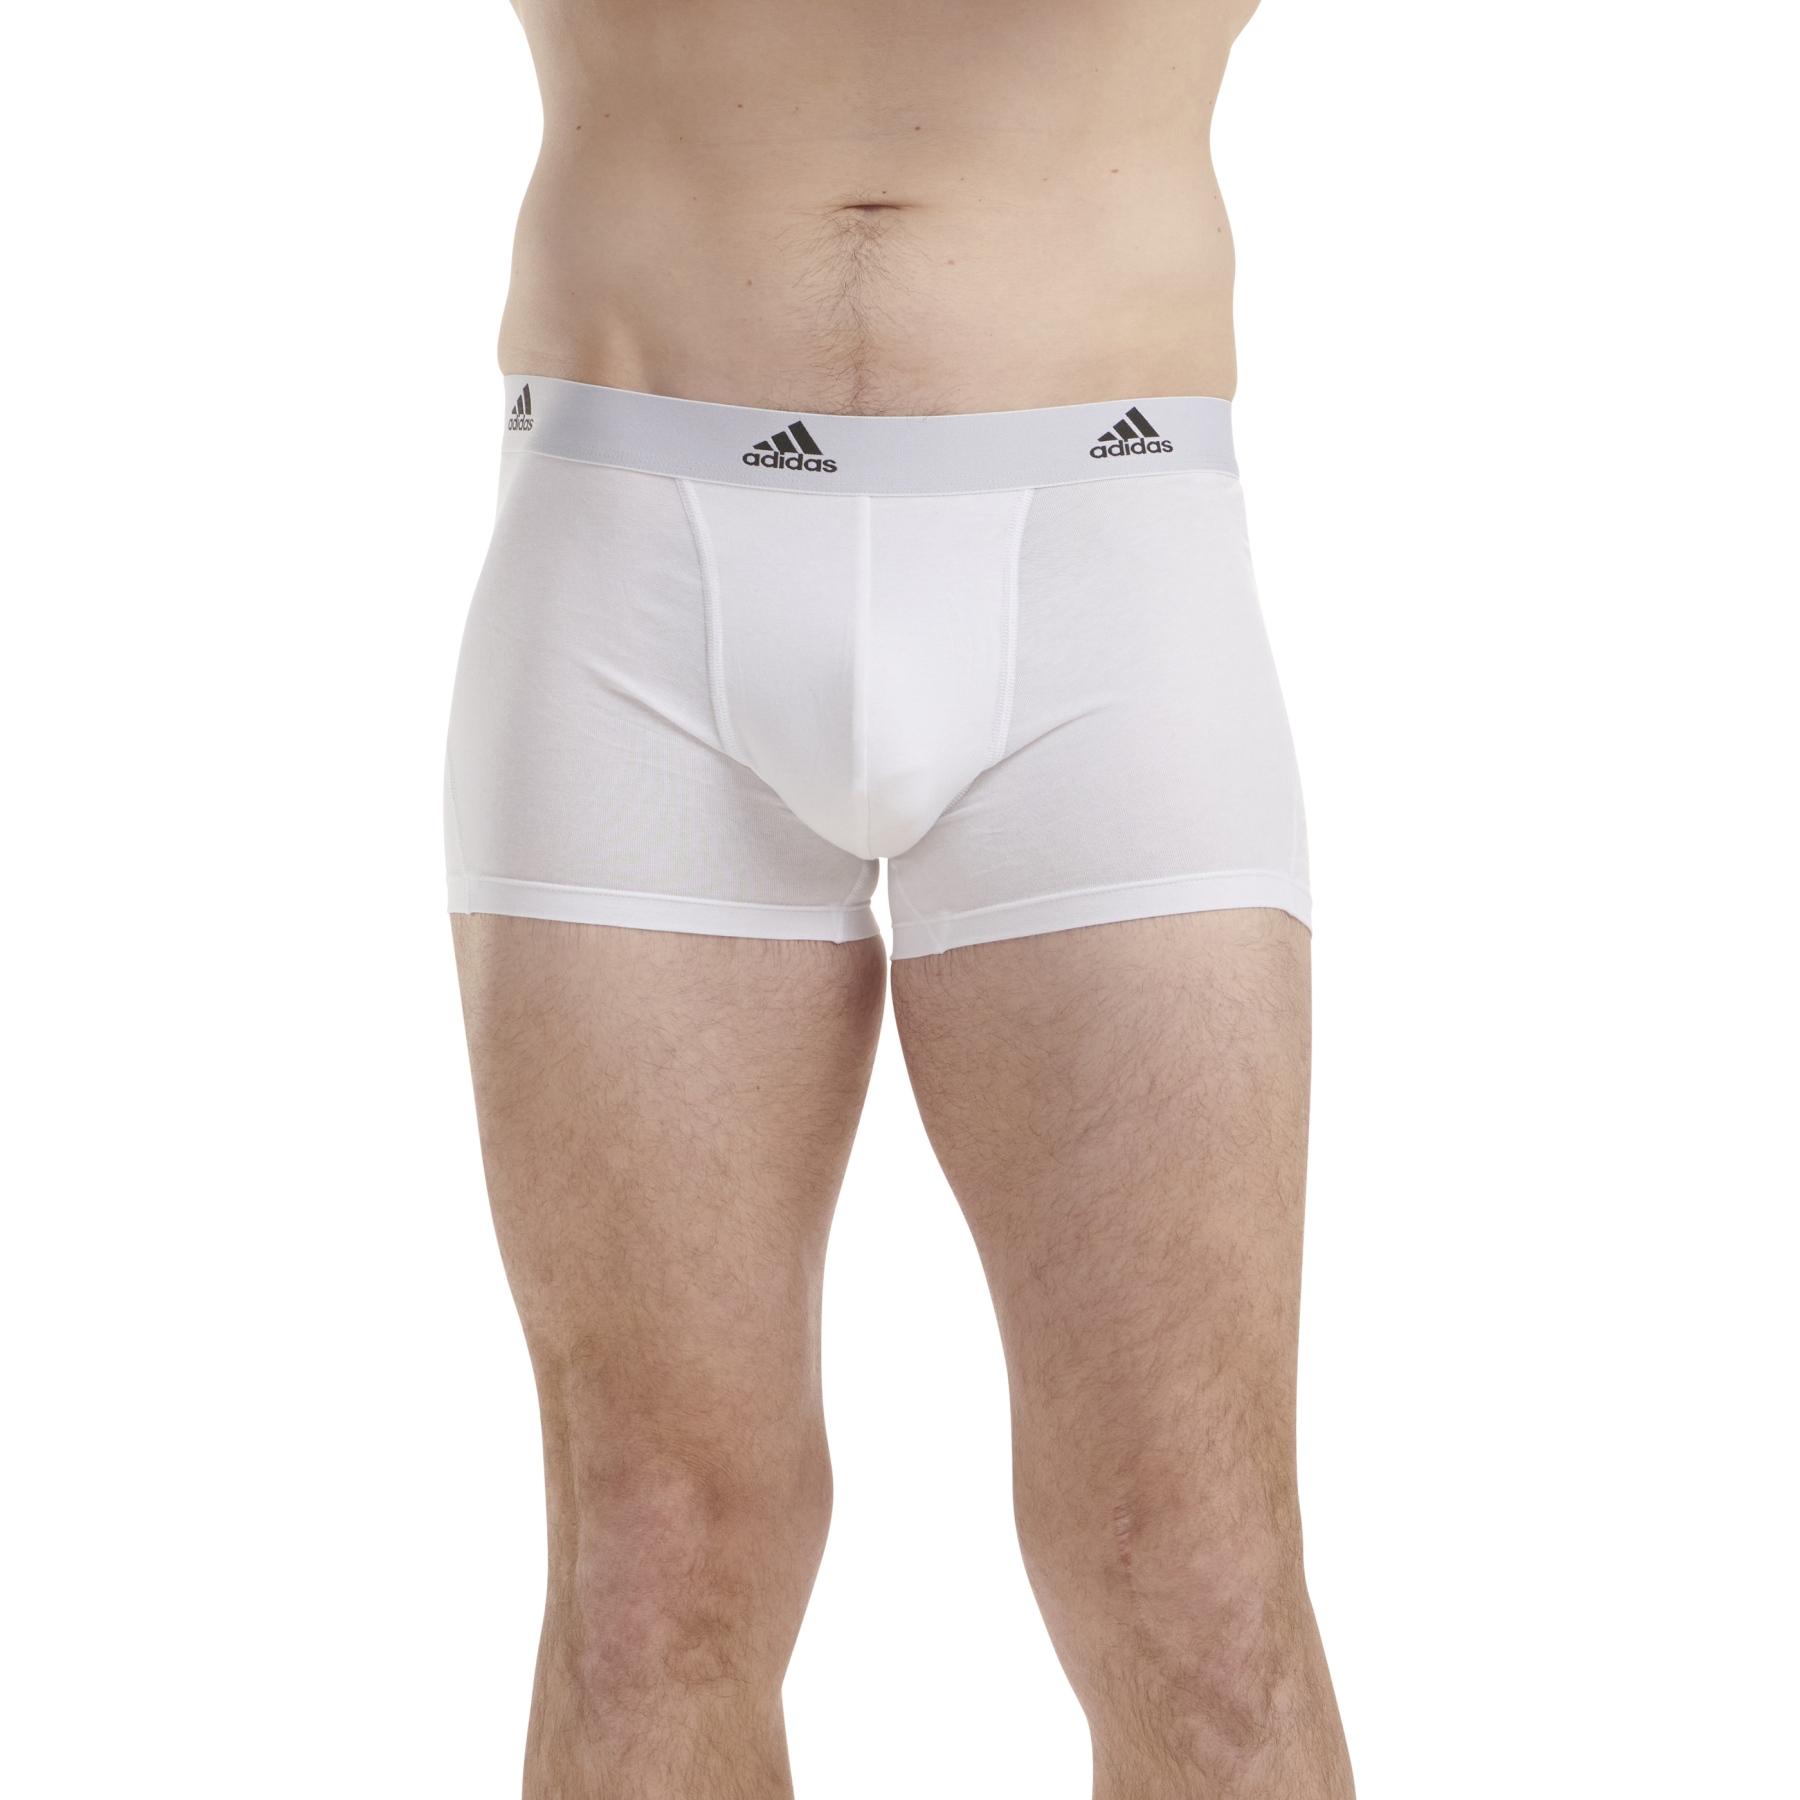 ADIDAS Performance Underwear 3 Pack Quick-Dry Fabric Size L Boxer Brief